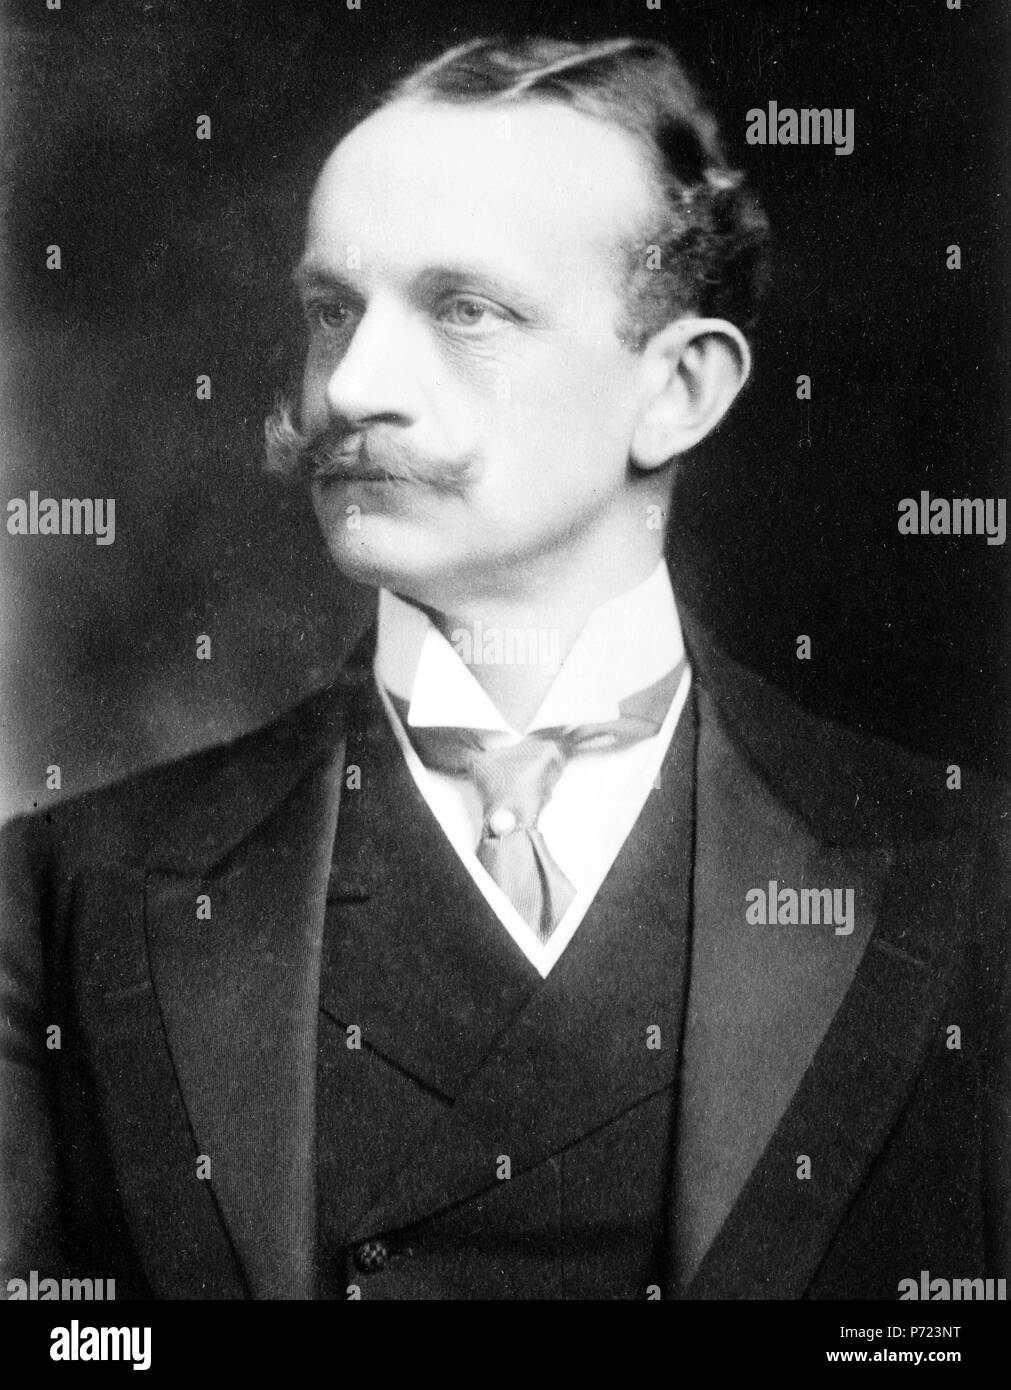 Count von Bernstorff, portr. Dec 1908, one of the men Hitler personally blamed for the collapse of Germany after the Great War. Stock Photo